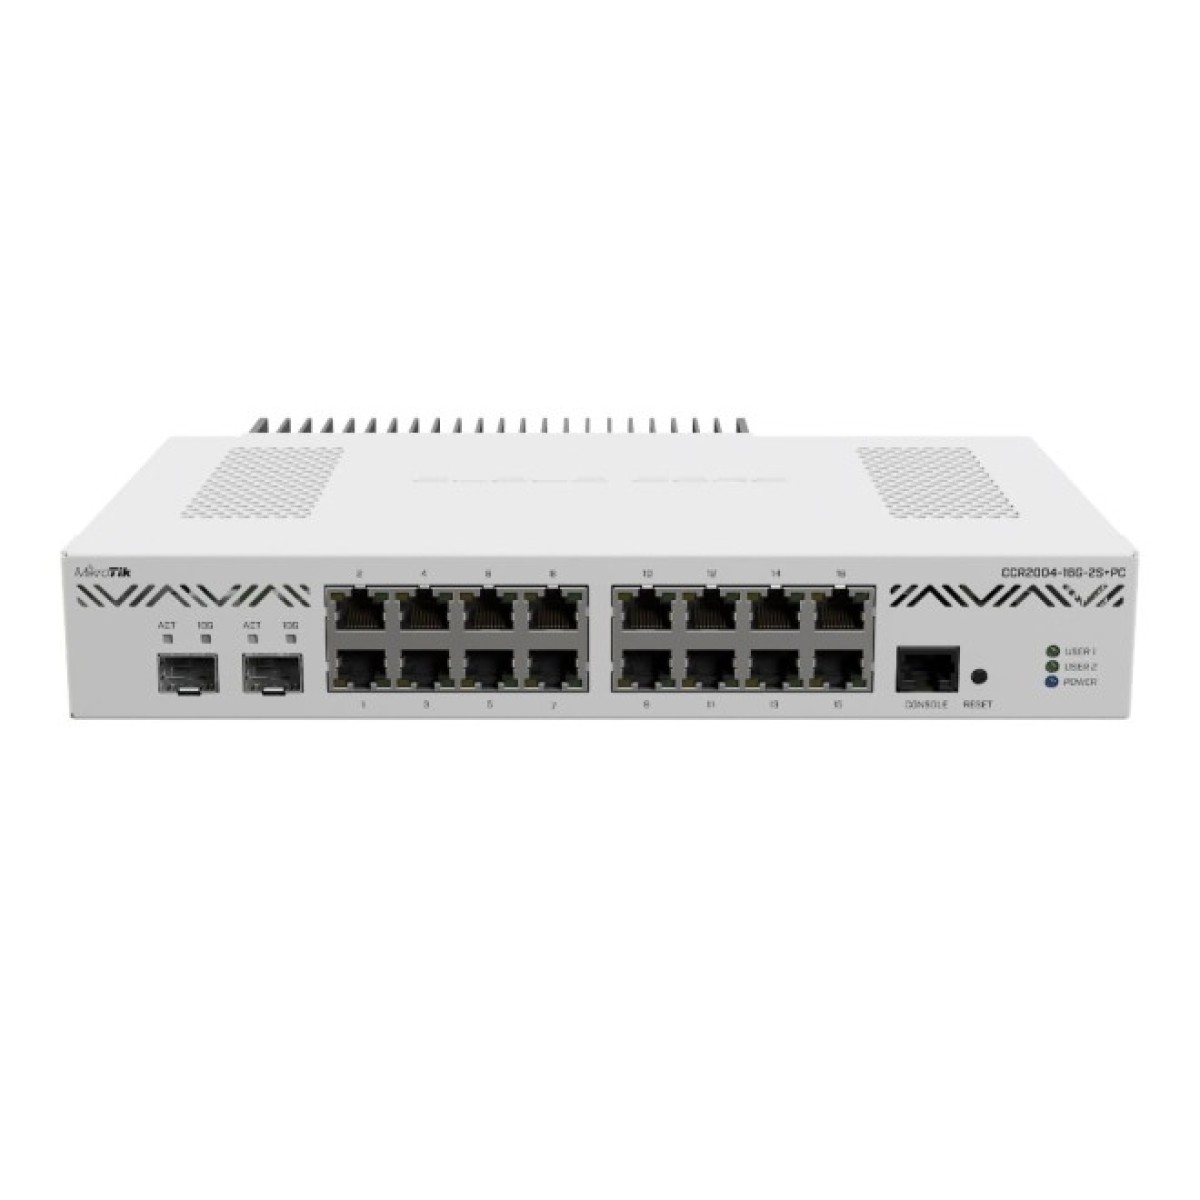 Маршрутизатор MikroTik Cloud Core Router CCR2004-16G-2S+PC 256_256.jpg